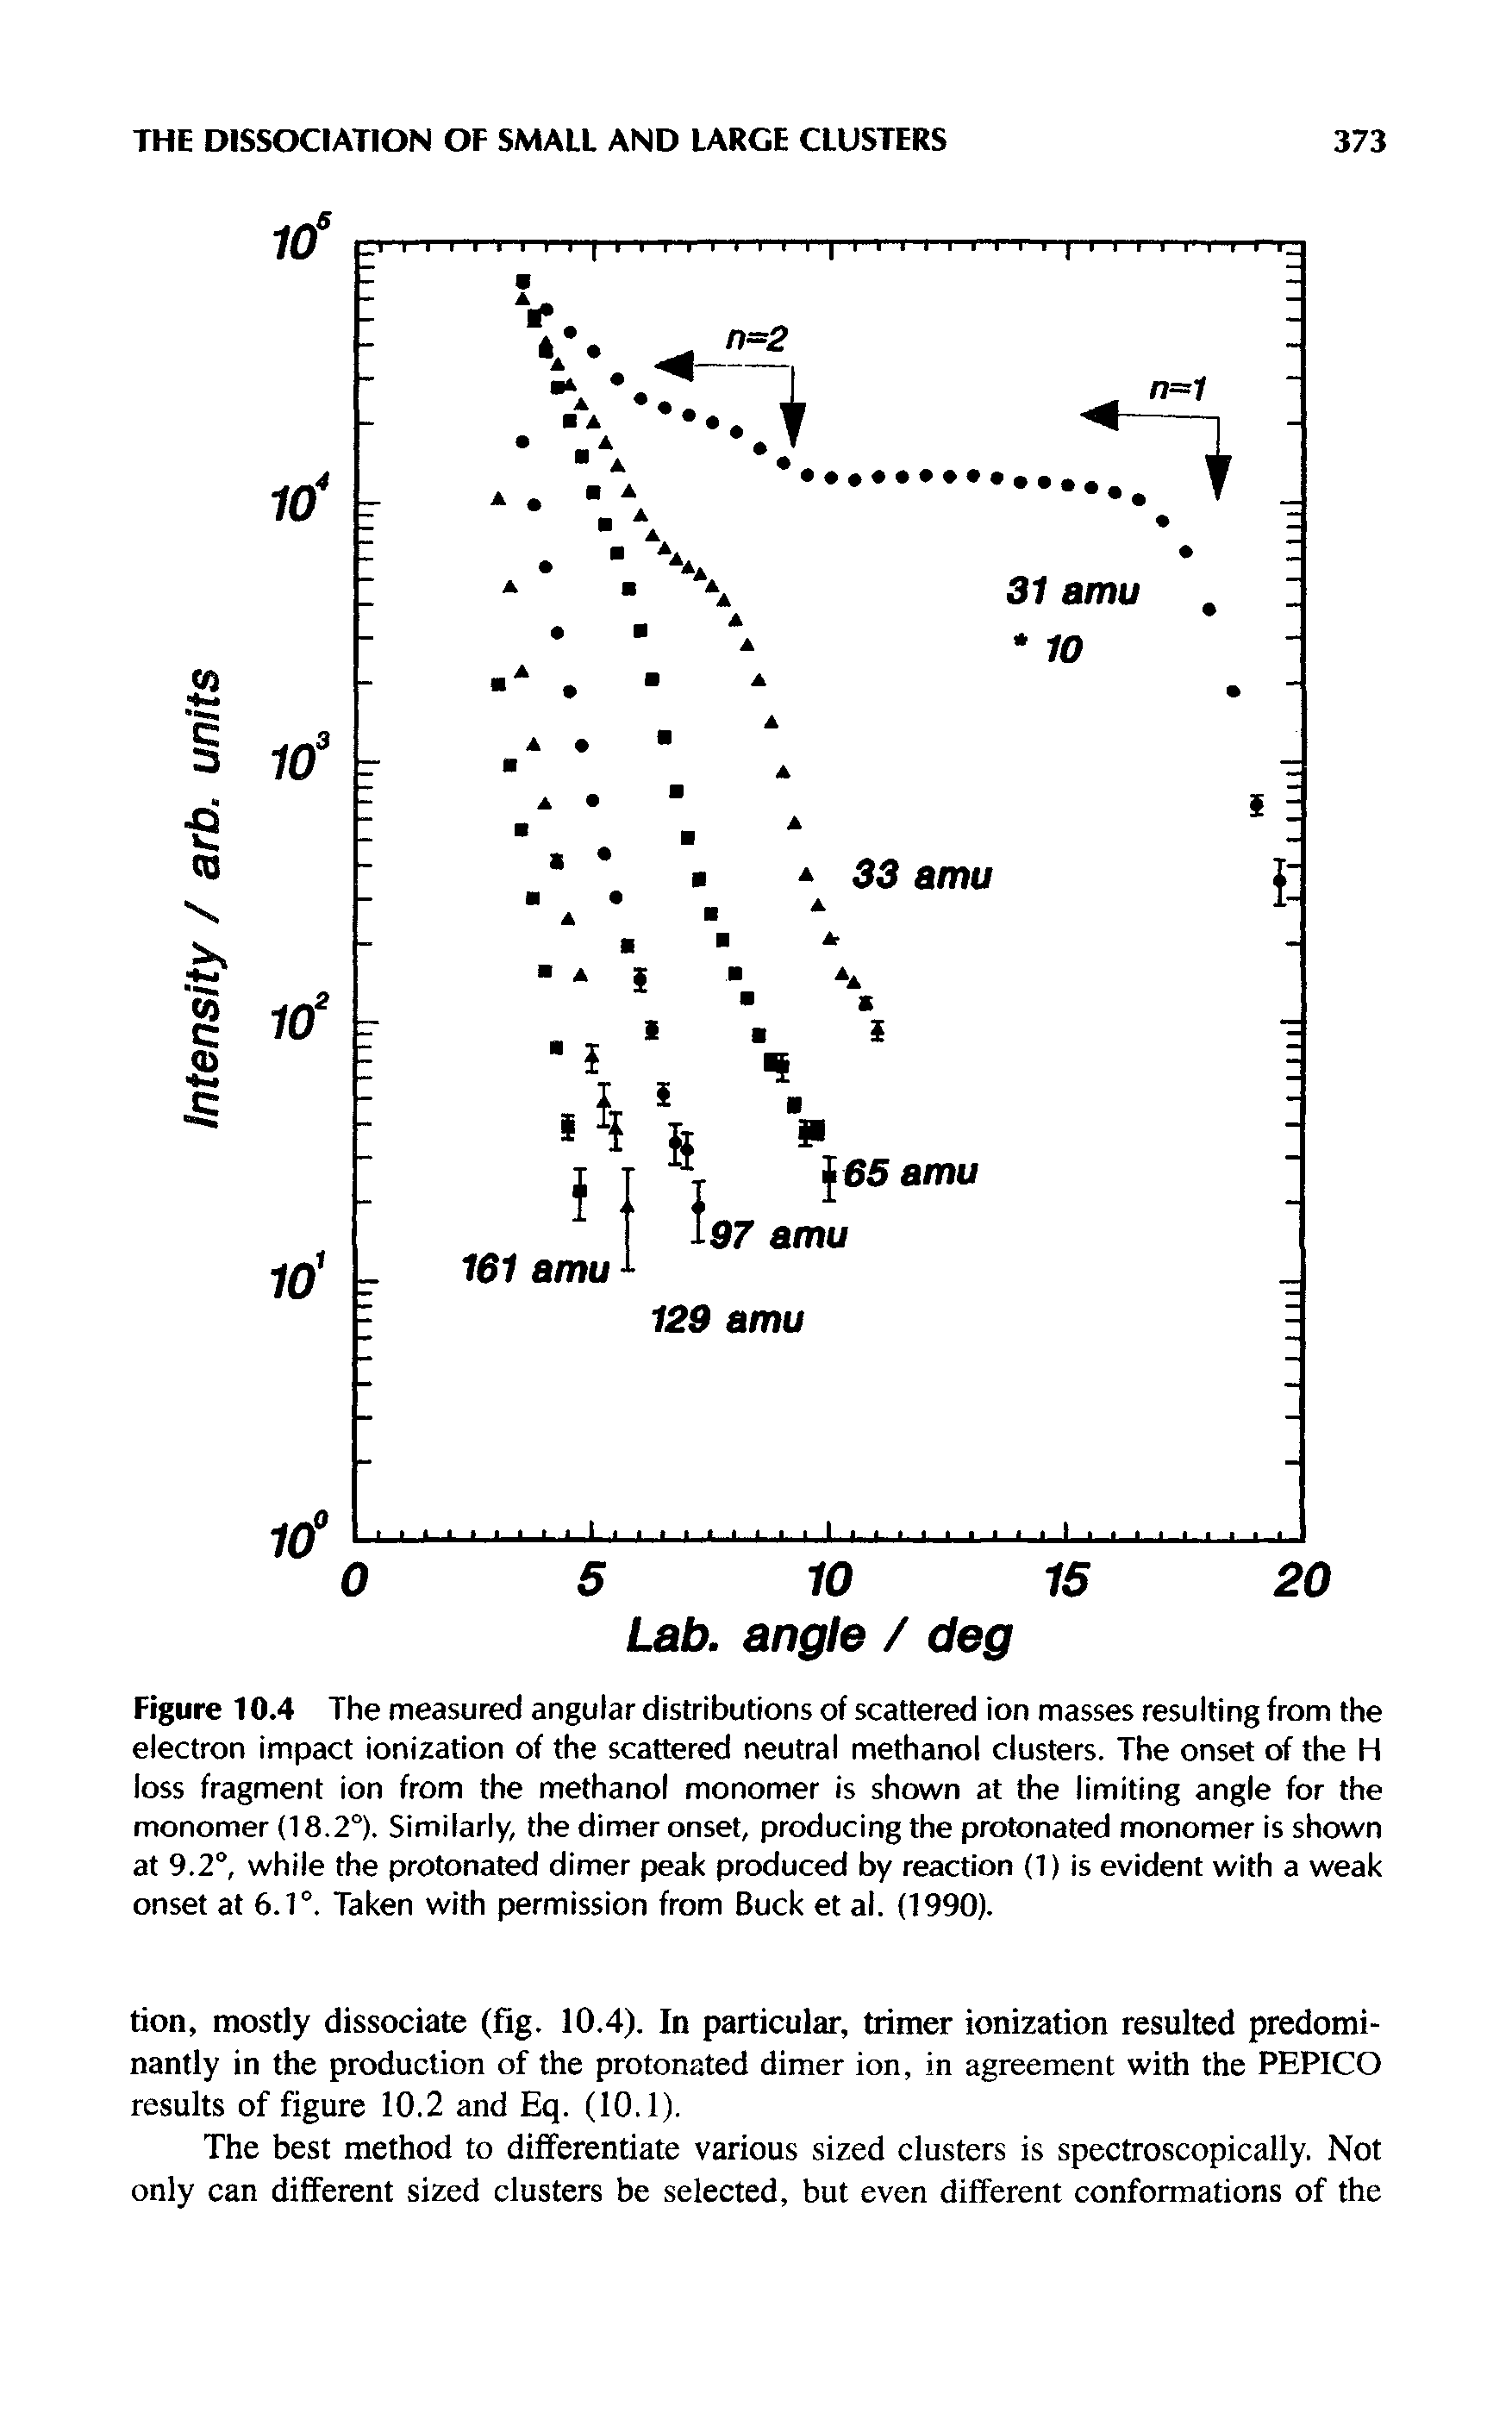 Figure 10.4 The measured angular distributions of scattered ion masses resulting from the electron impact ionization of the scattered neutral methanol clusters. The onset of the H loss fragment ion from the methanol monomer is shown at the limiting angle for the monomer (18.2°). Similarly, the dimer onset, producing the protonated monomer is shown at 9.2°, while the protonated dimer peak produced by reaction (1) is evident with a weak onset at 6.1°. Taken with permission from Buck et al. (1990).